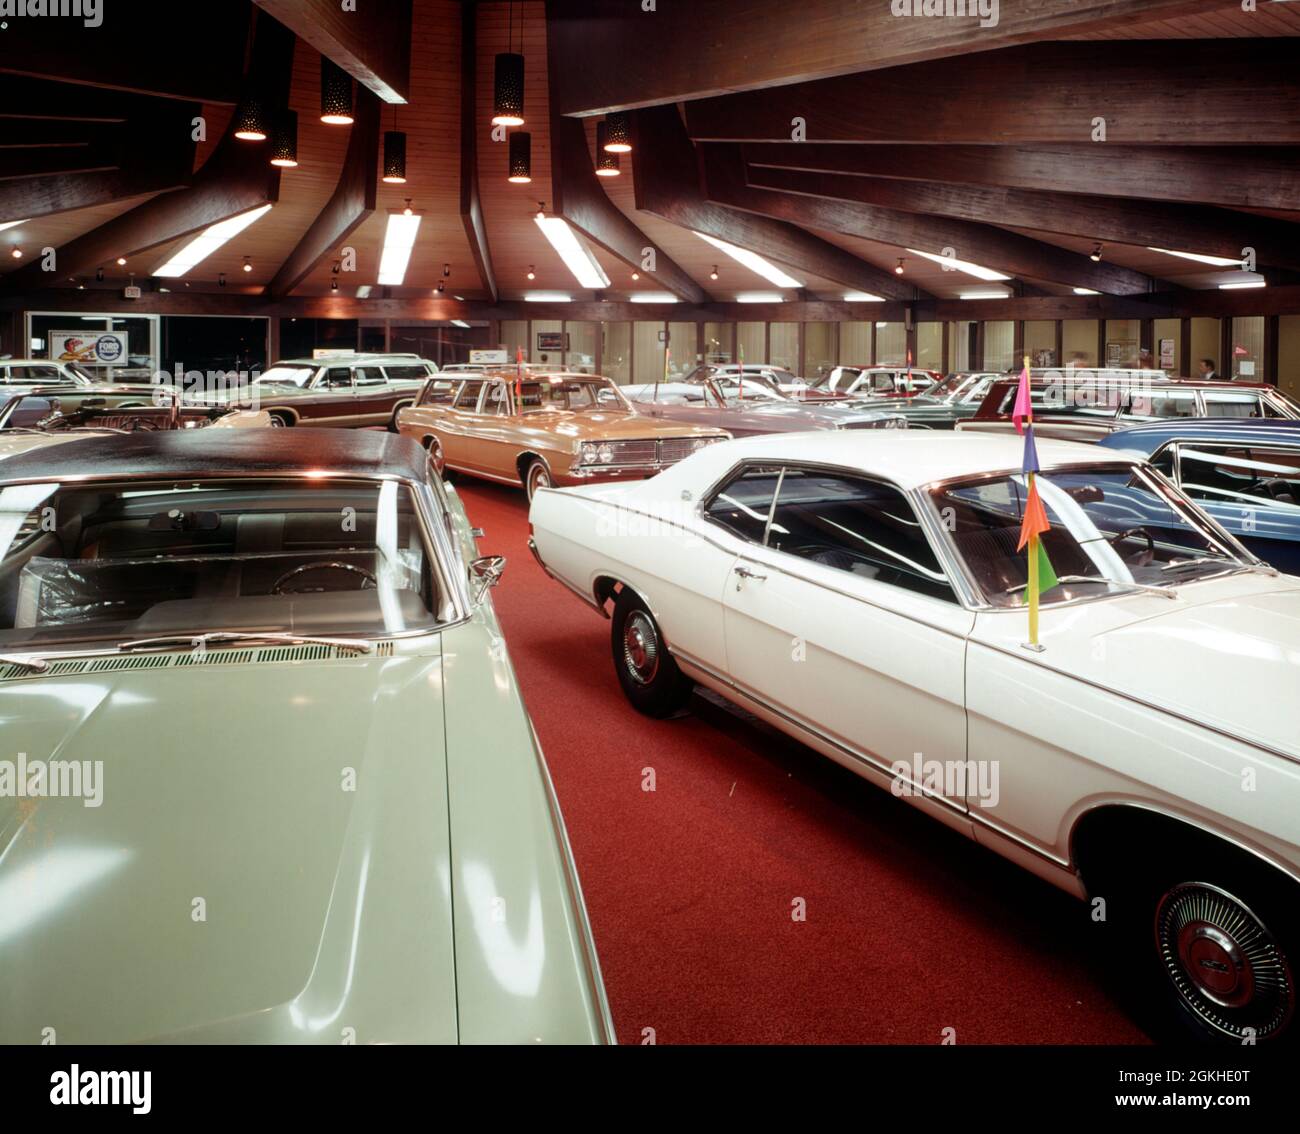 1970s 1975 AUTOMOBILE DEALER SALES SHOWROOM NEW CAR MODELS SEDANS STATION WAGON CENTER PIECE OTHERS IN A SURROUNDING CIRCLE - km3494 PEA001 HARS MOTOR VEHICLE AUTOS CHOICE EXCITEMENT PRIDE OPPORTUNITY MOTORING OCCUPATIONS CONCEPTUAL AUTOMOBILES MOBILITY STYLISH VEHICLES COMMERCE OLD FASHIONED Stock Photo